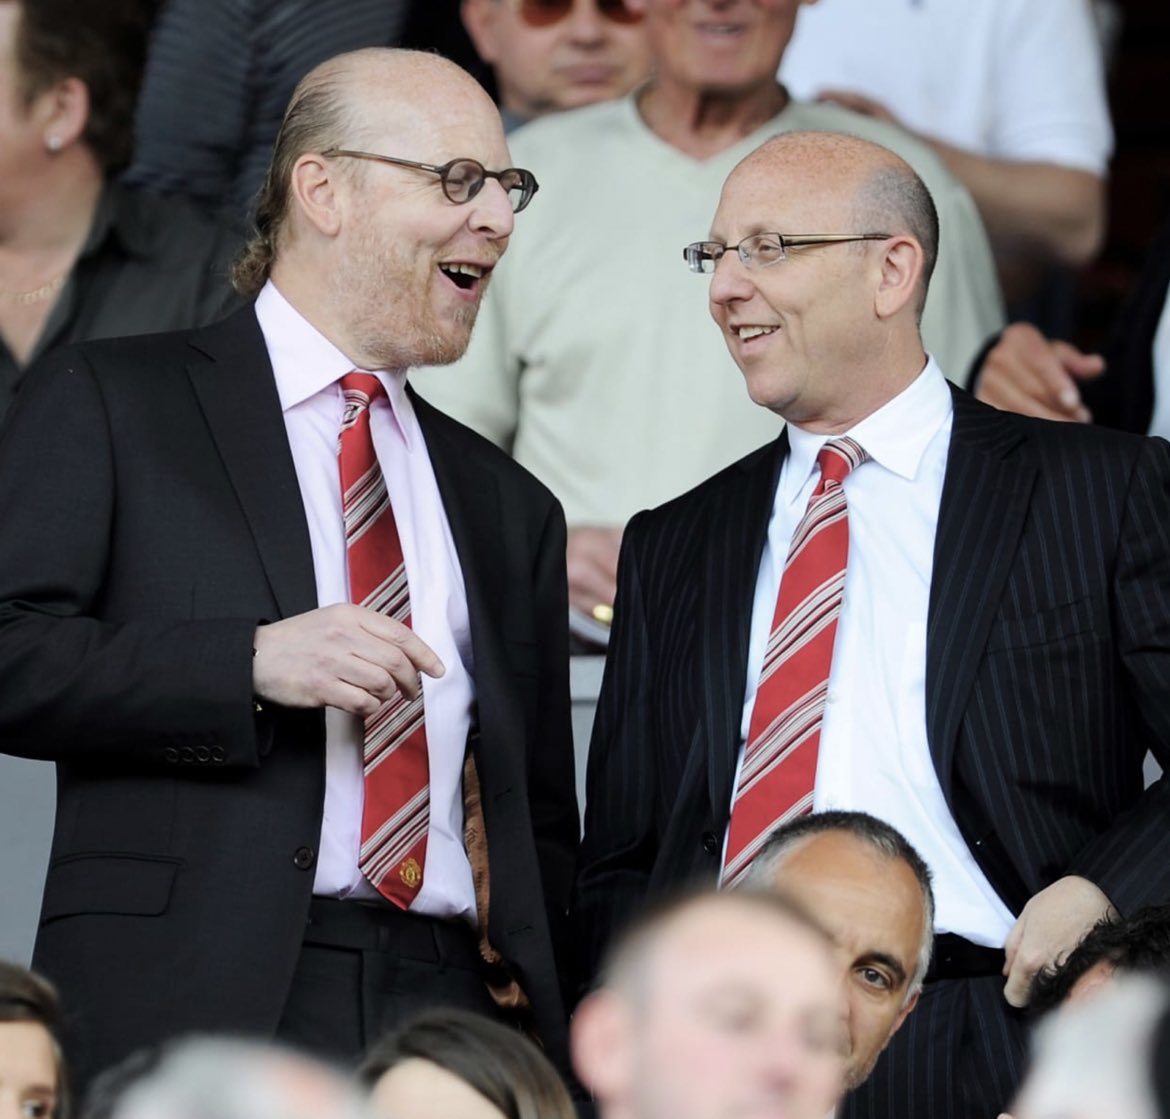 Manchester United are never going to be a serious club until these two parasites go